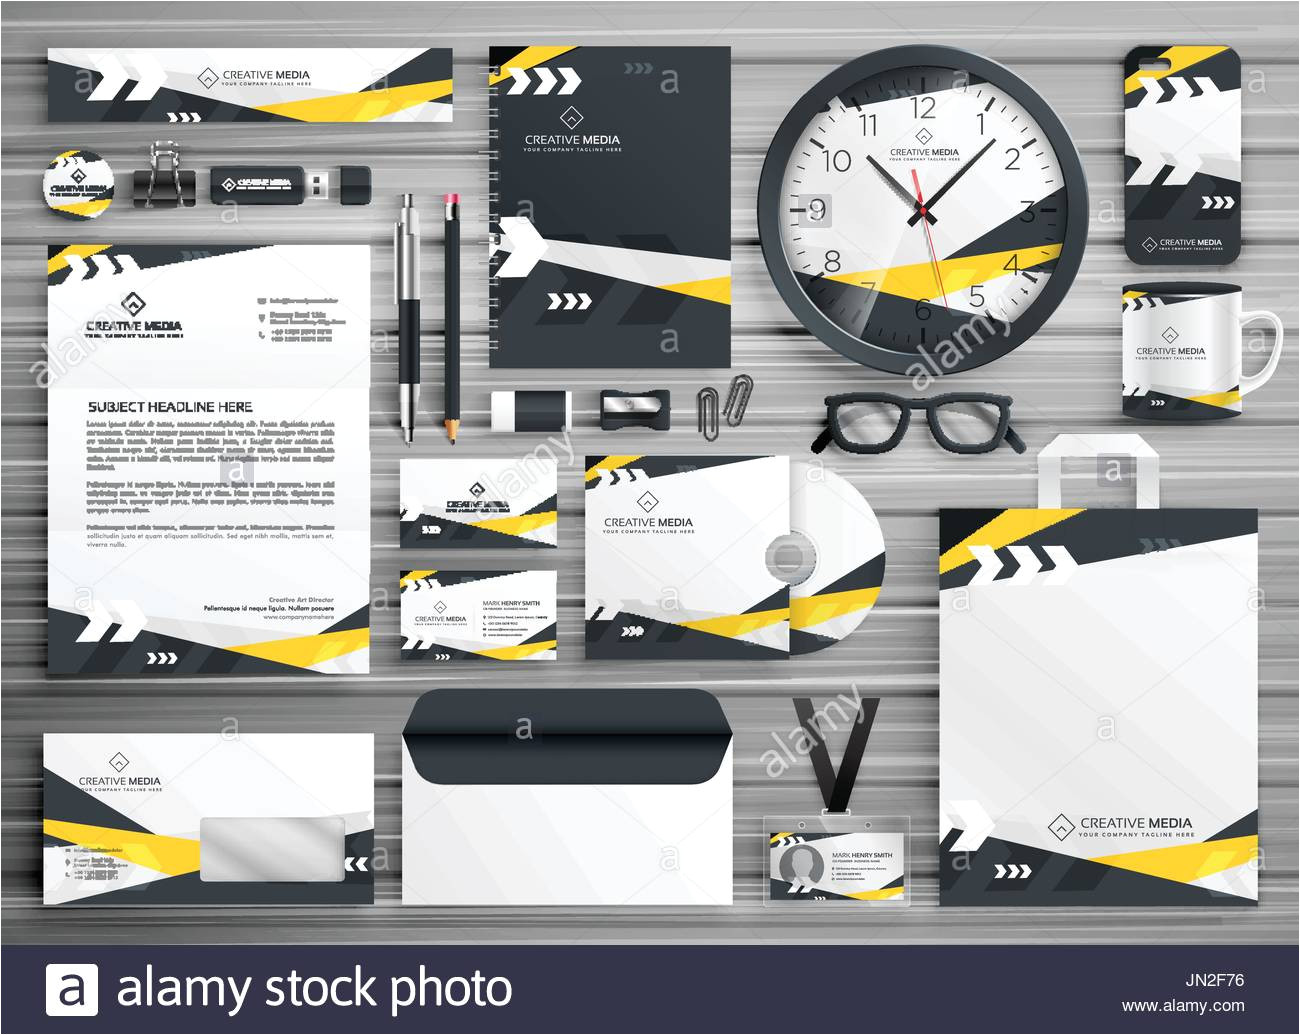 corporate identity stationery template design set with abstract yellow jn2f76 jpg